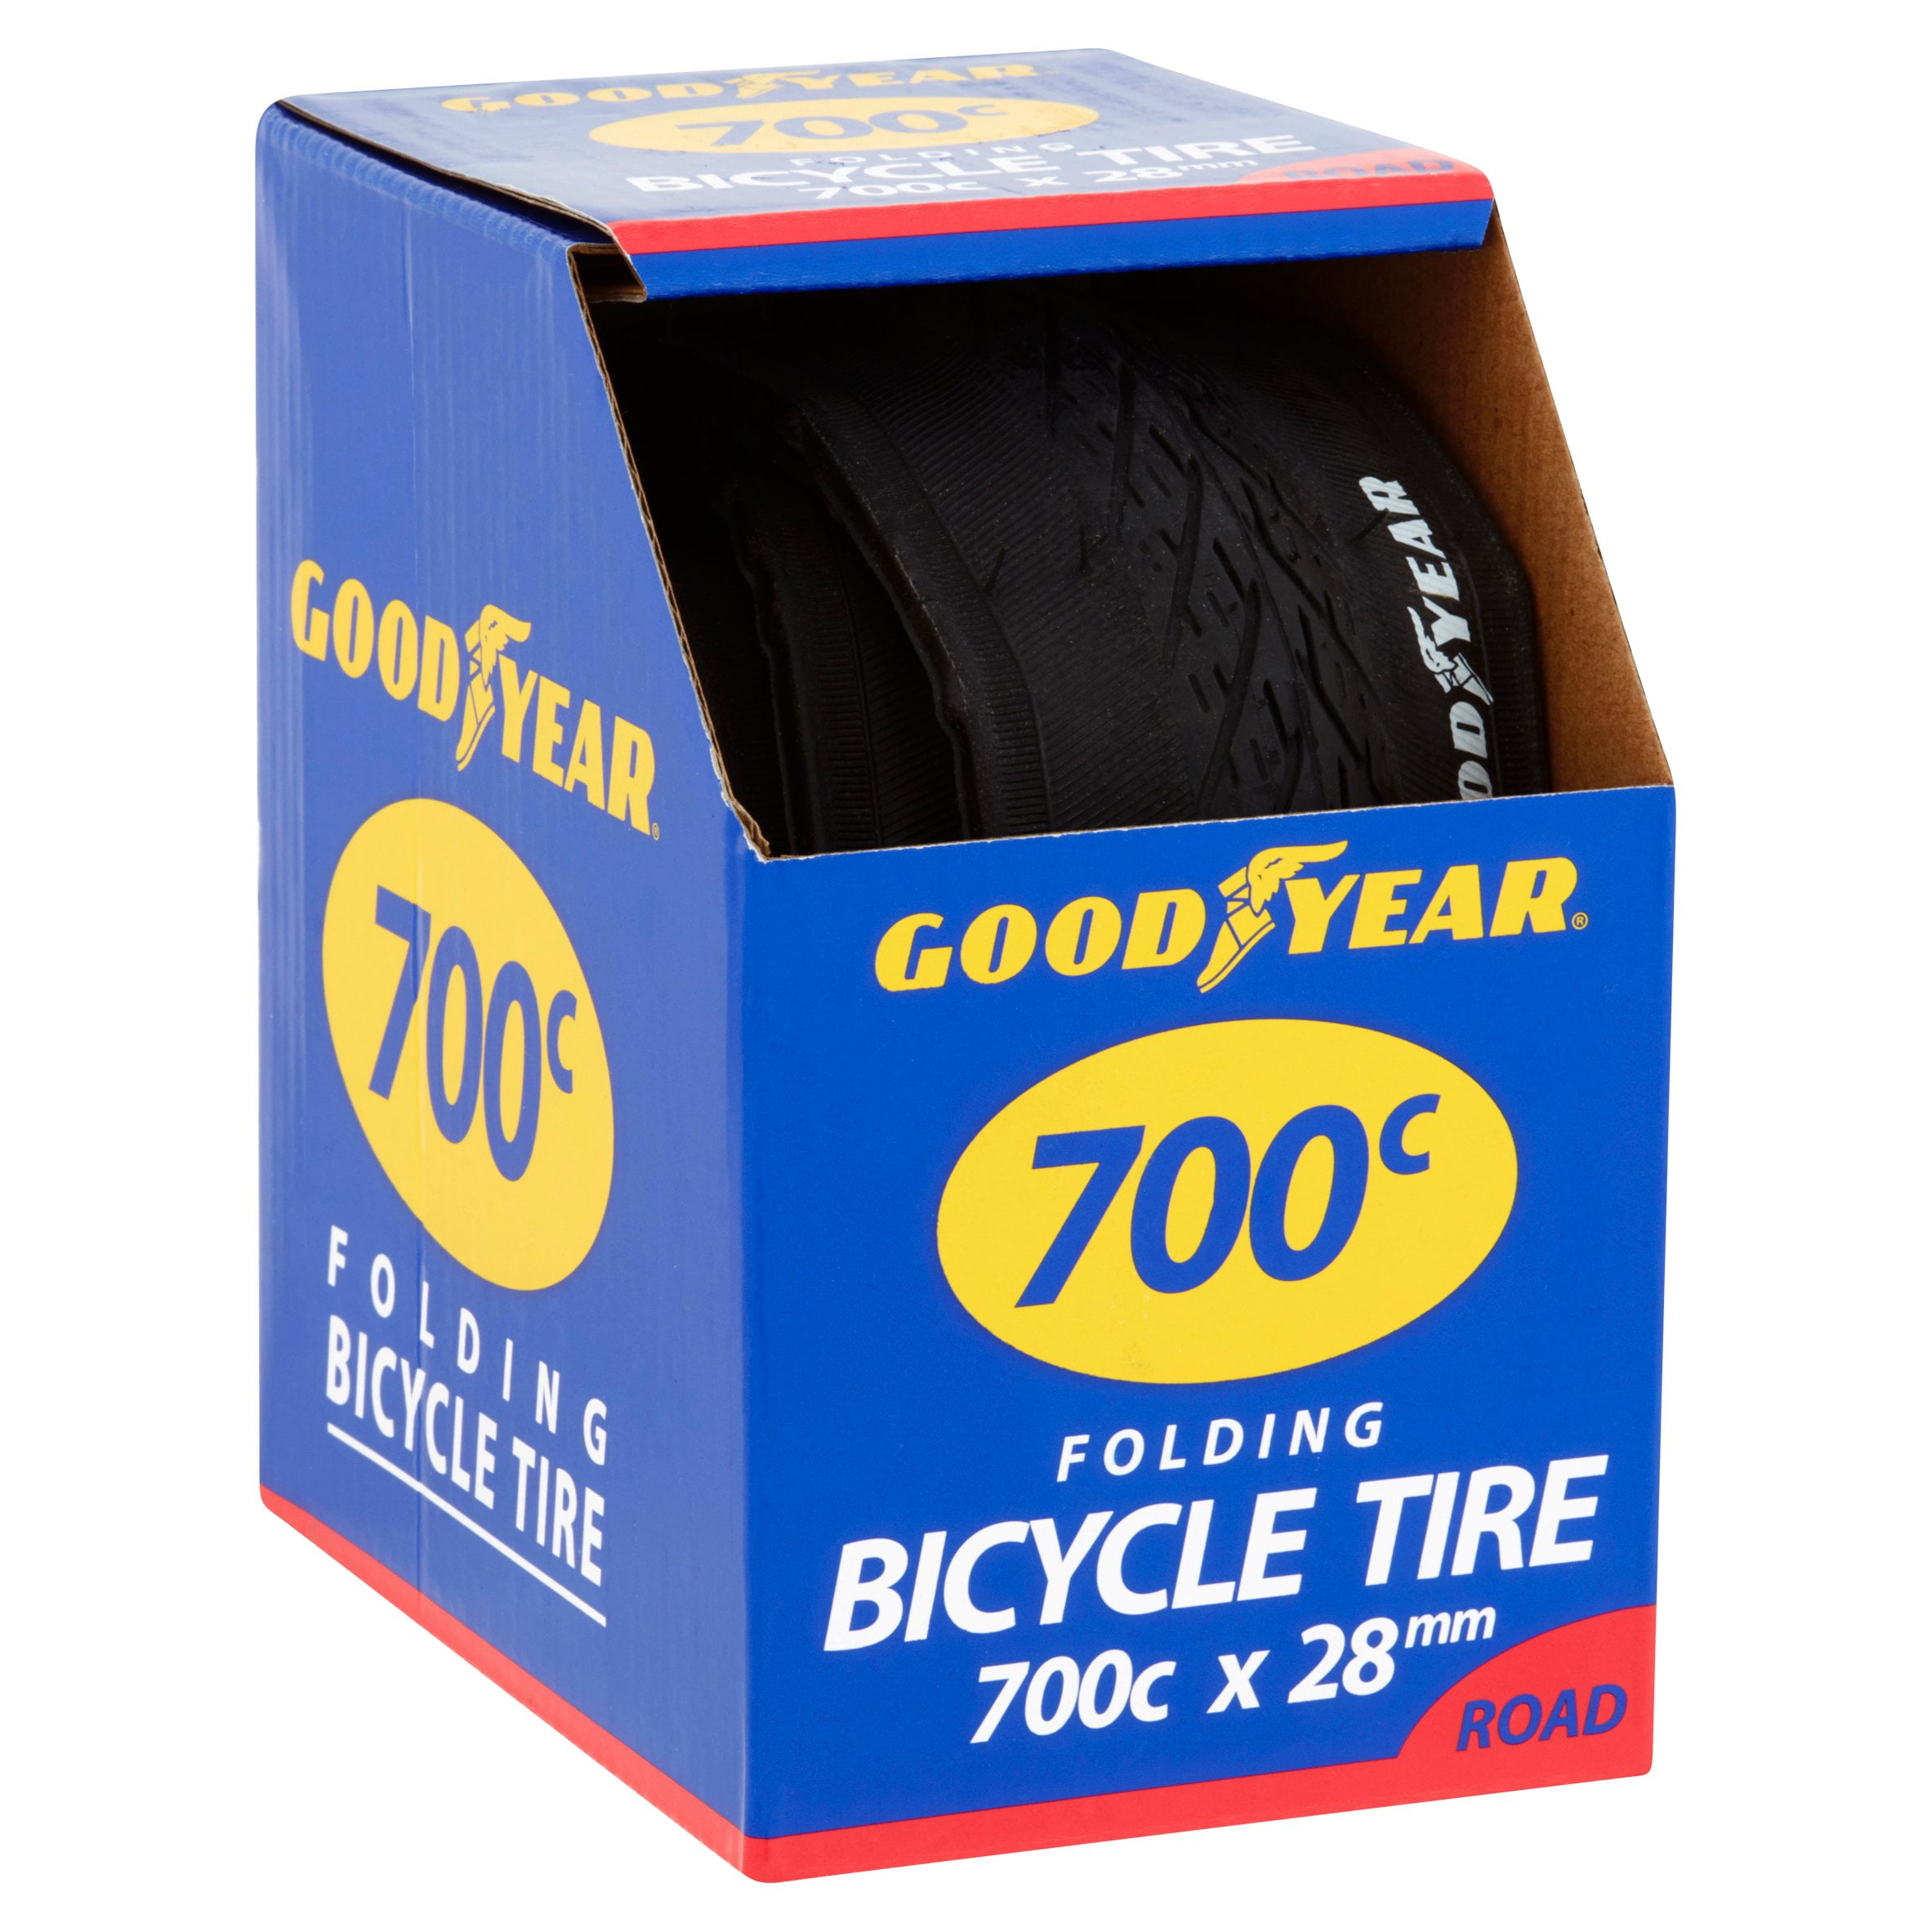 Details about   Good Year Folding Bicycle Tire 700C x 28mm Road Bike Tire New in Box 